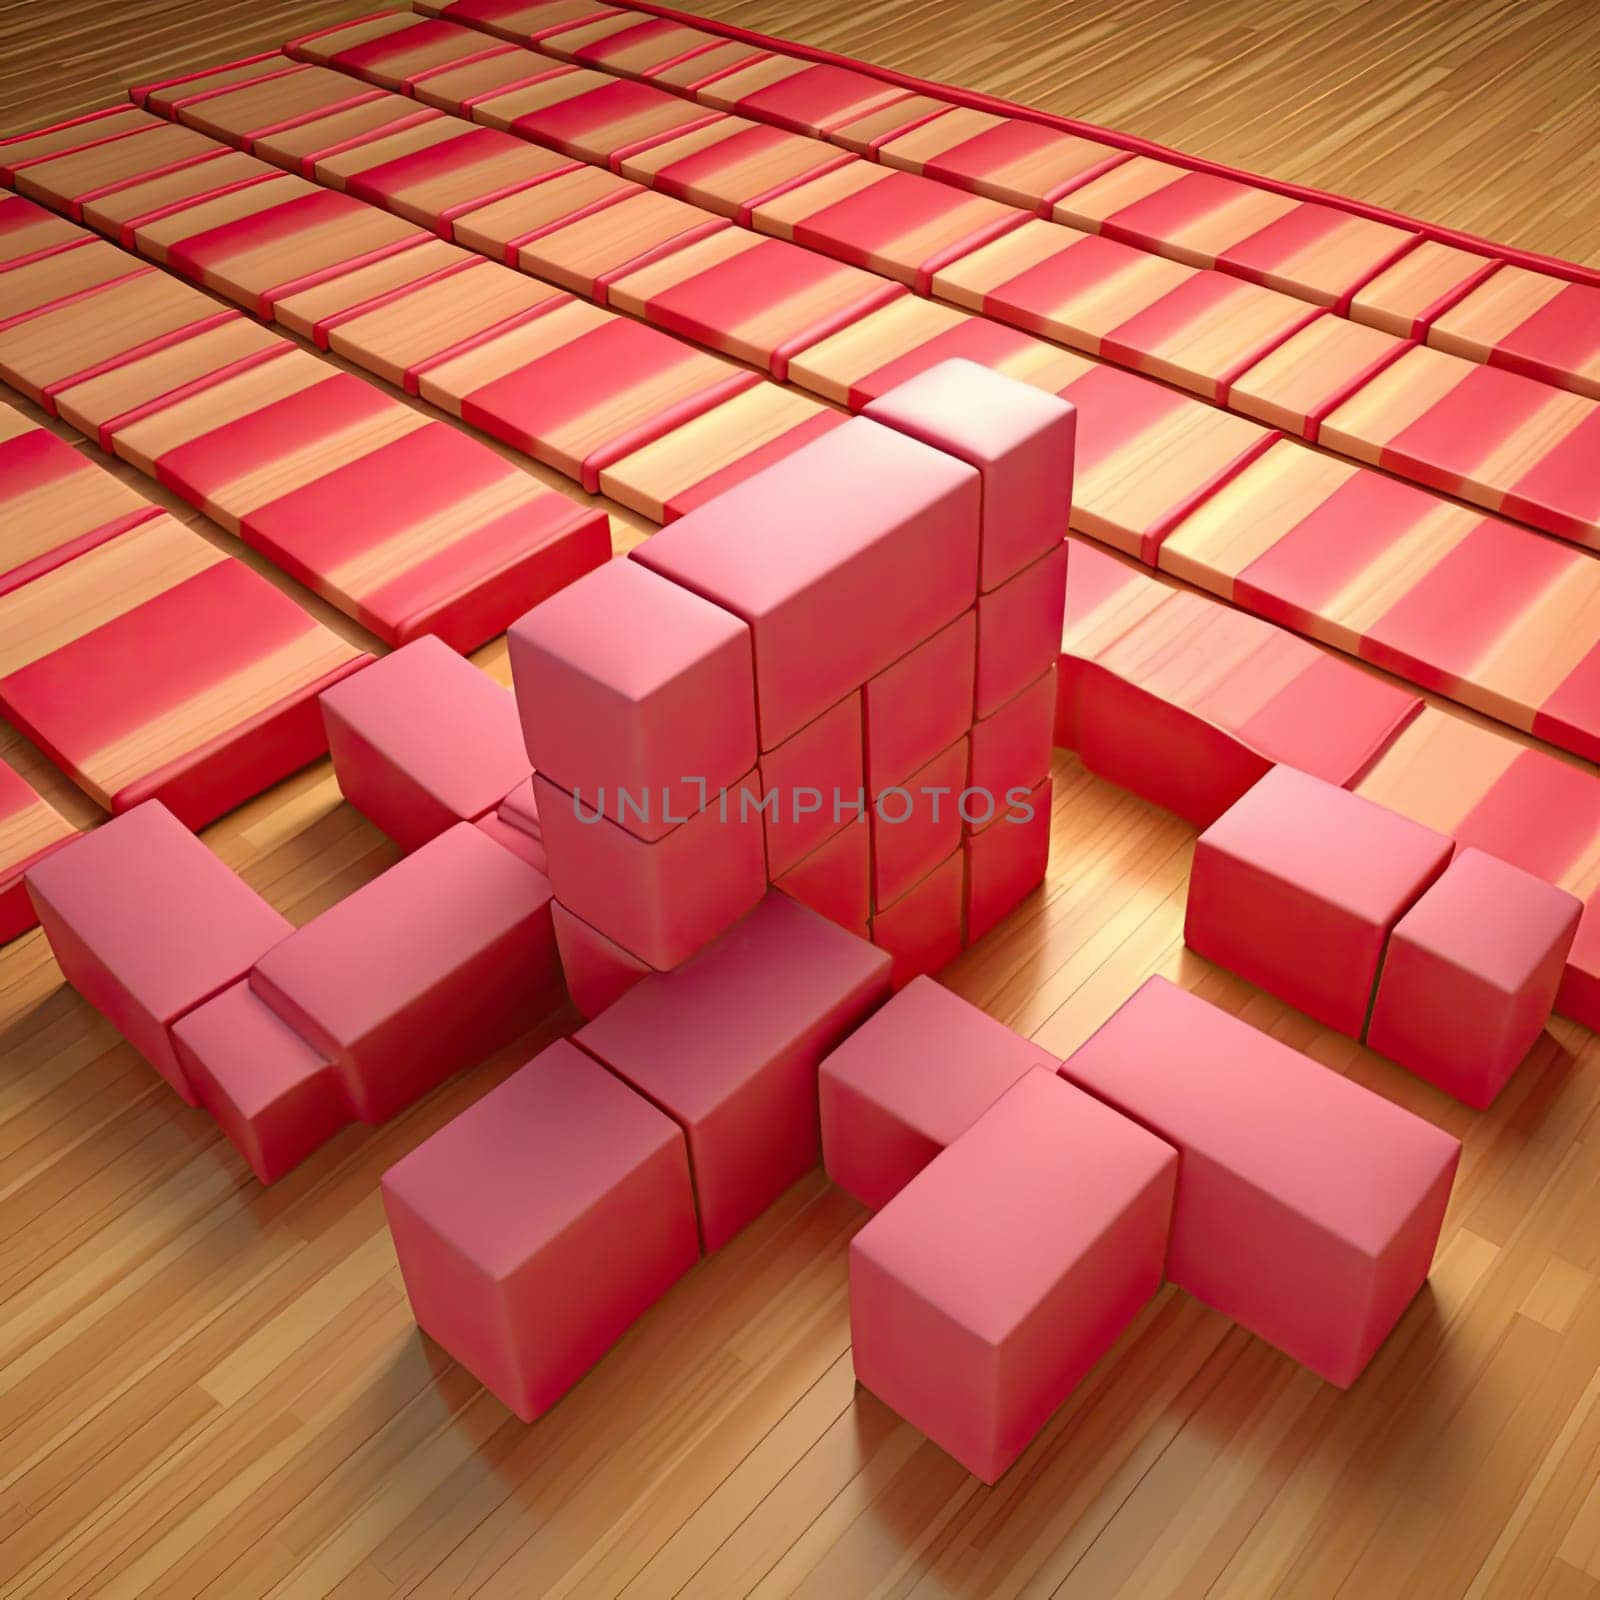 Red cubes on wooden floor - 3D illustration - perspective view (ID: 001571)